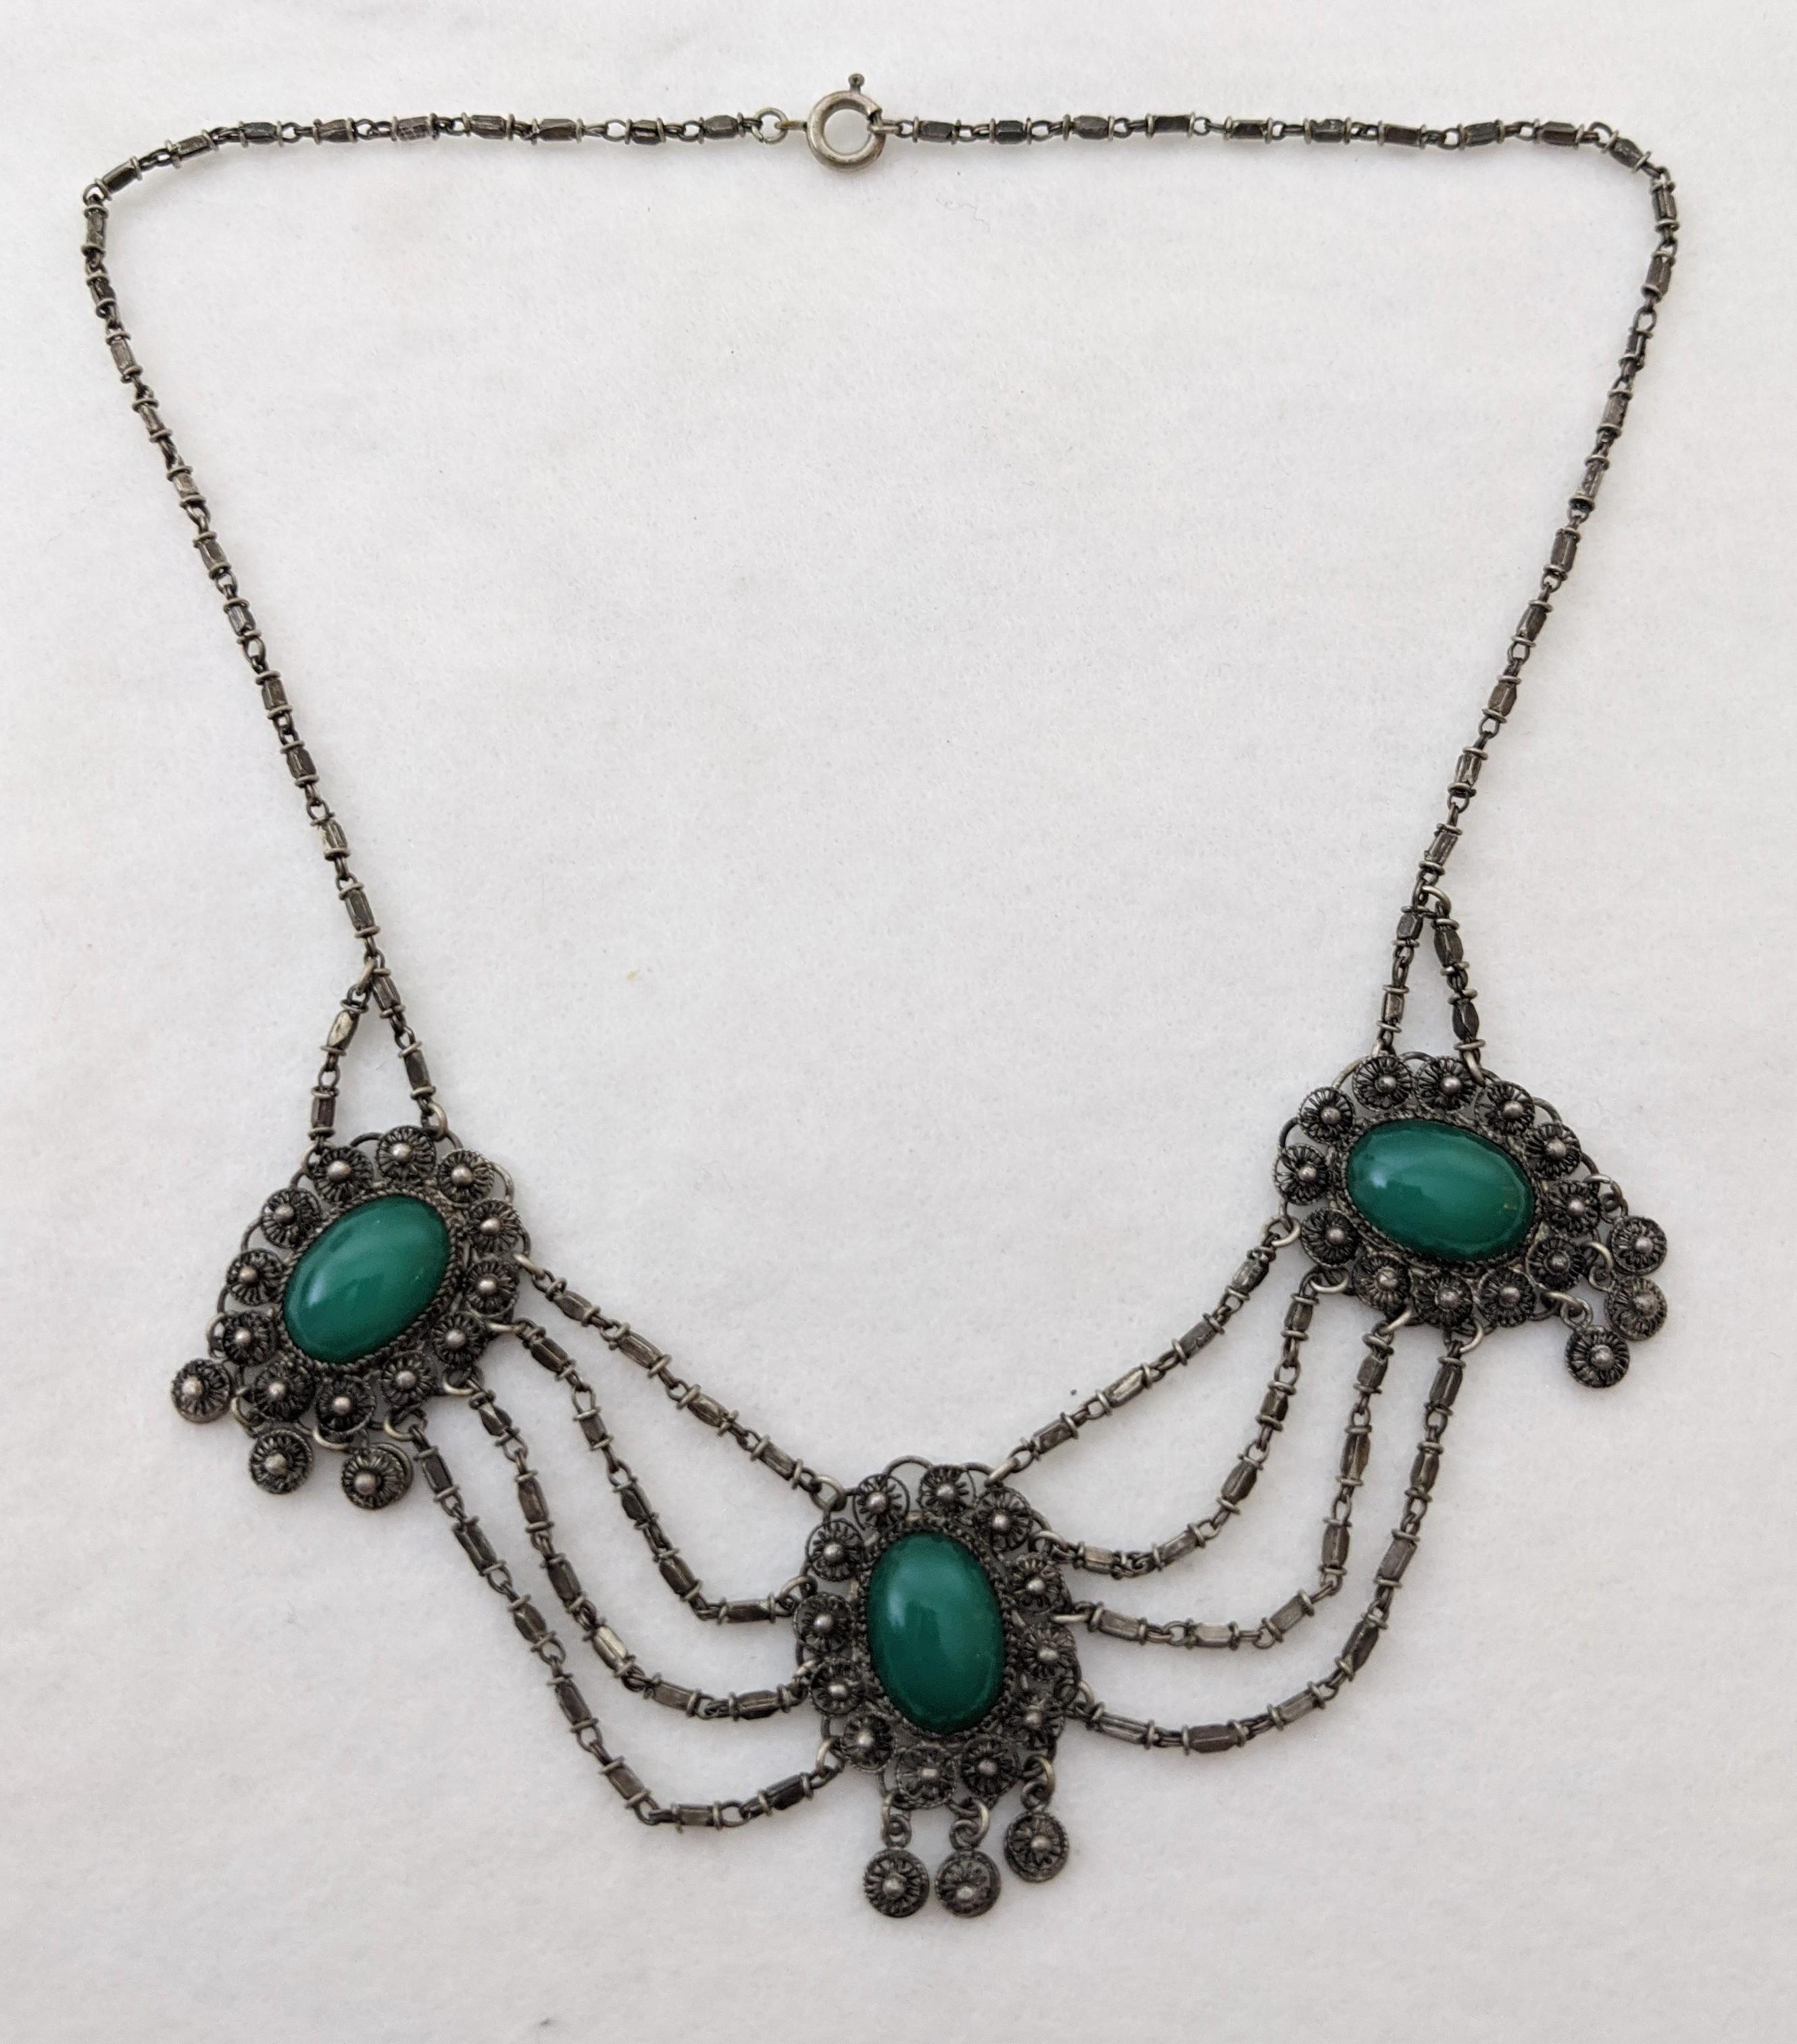 Eastern or Middle Eastern necklace | Antiques Board